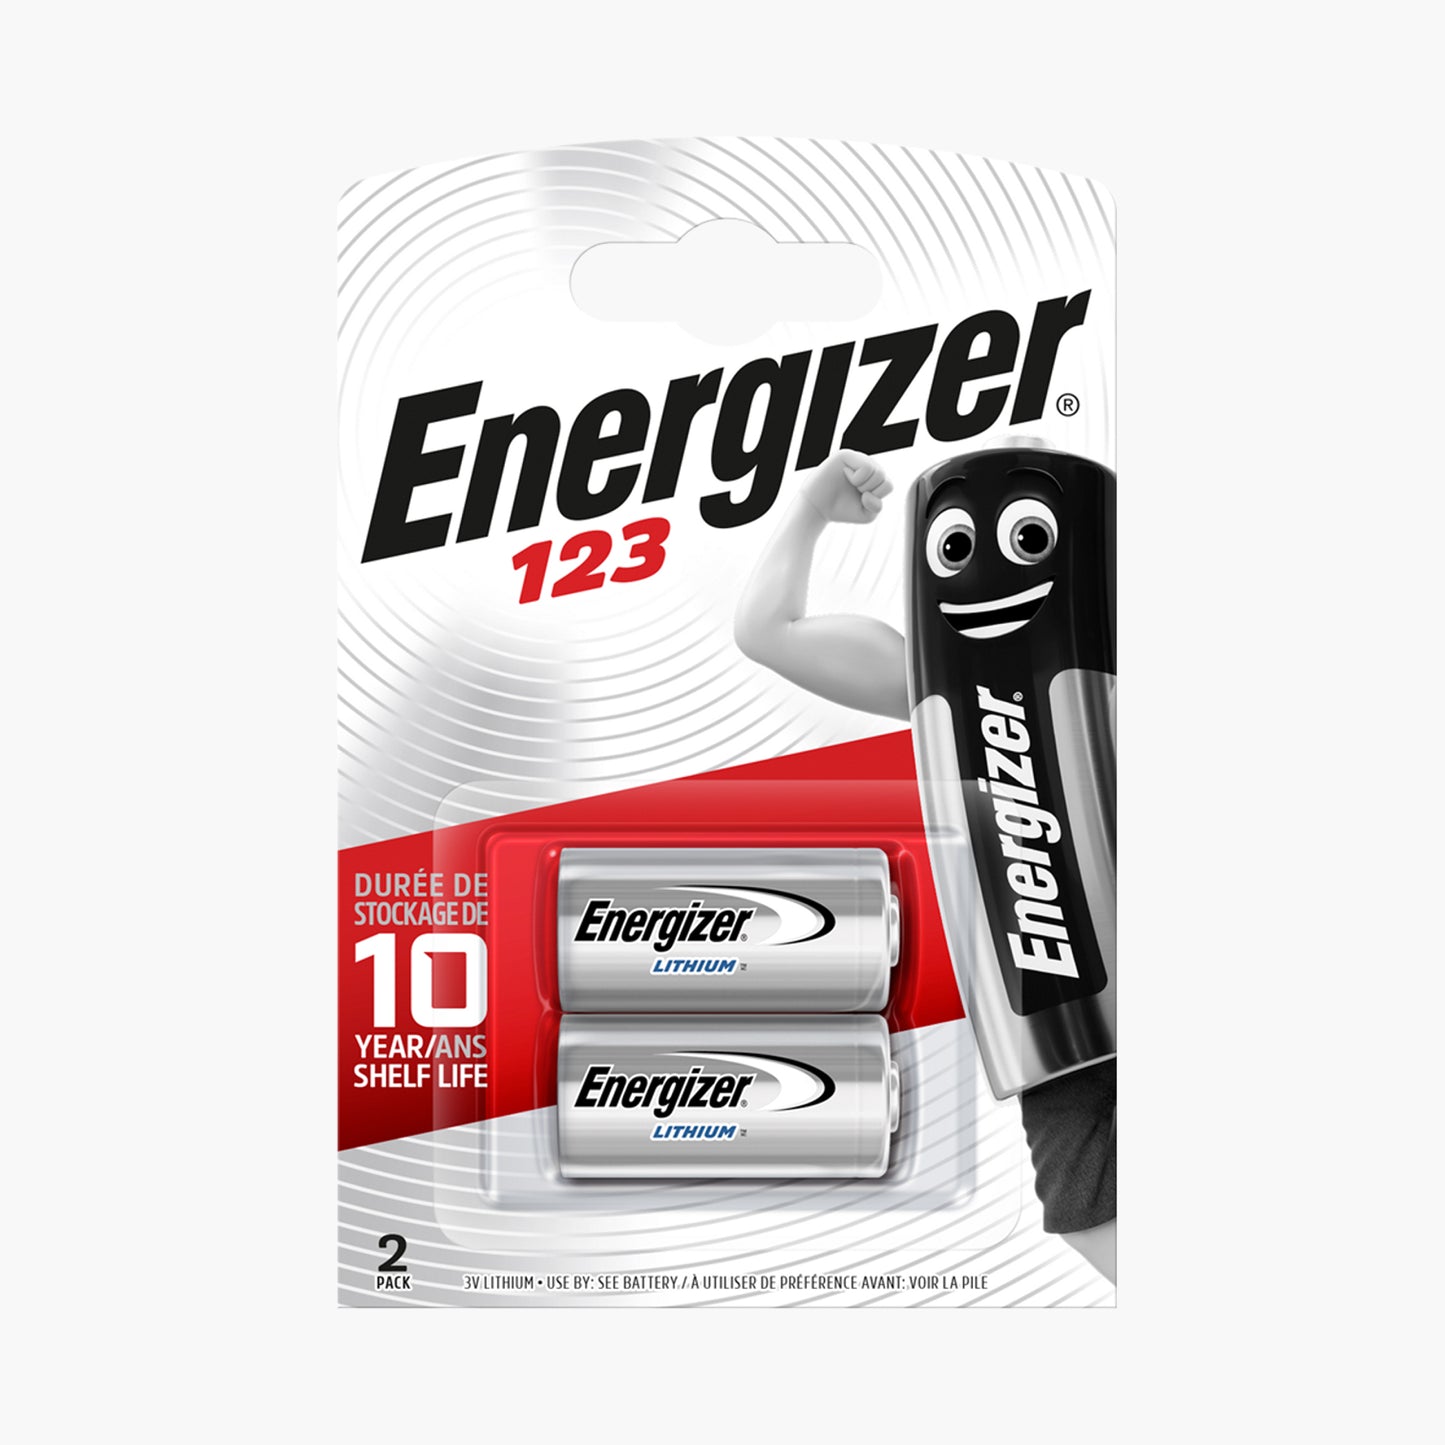 Energizer 123 Battery Double Pack